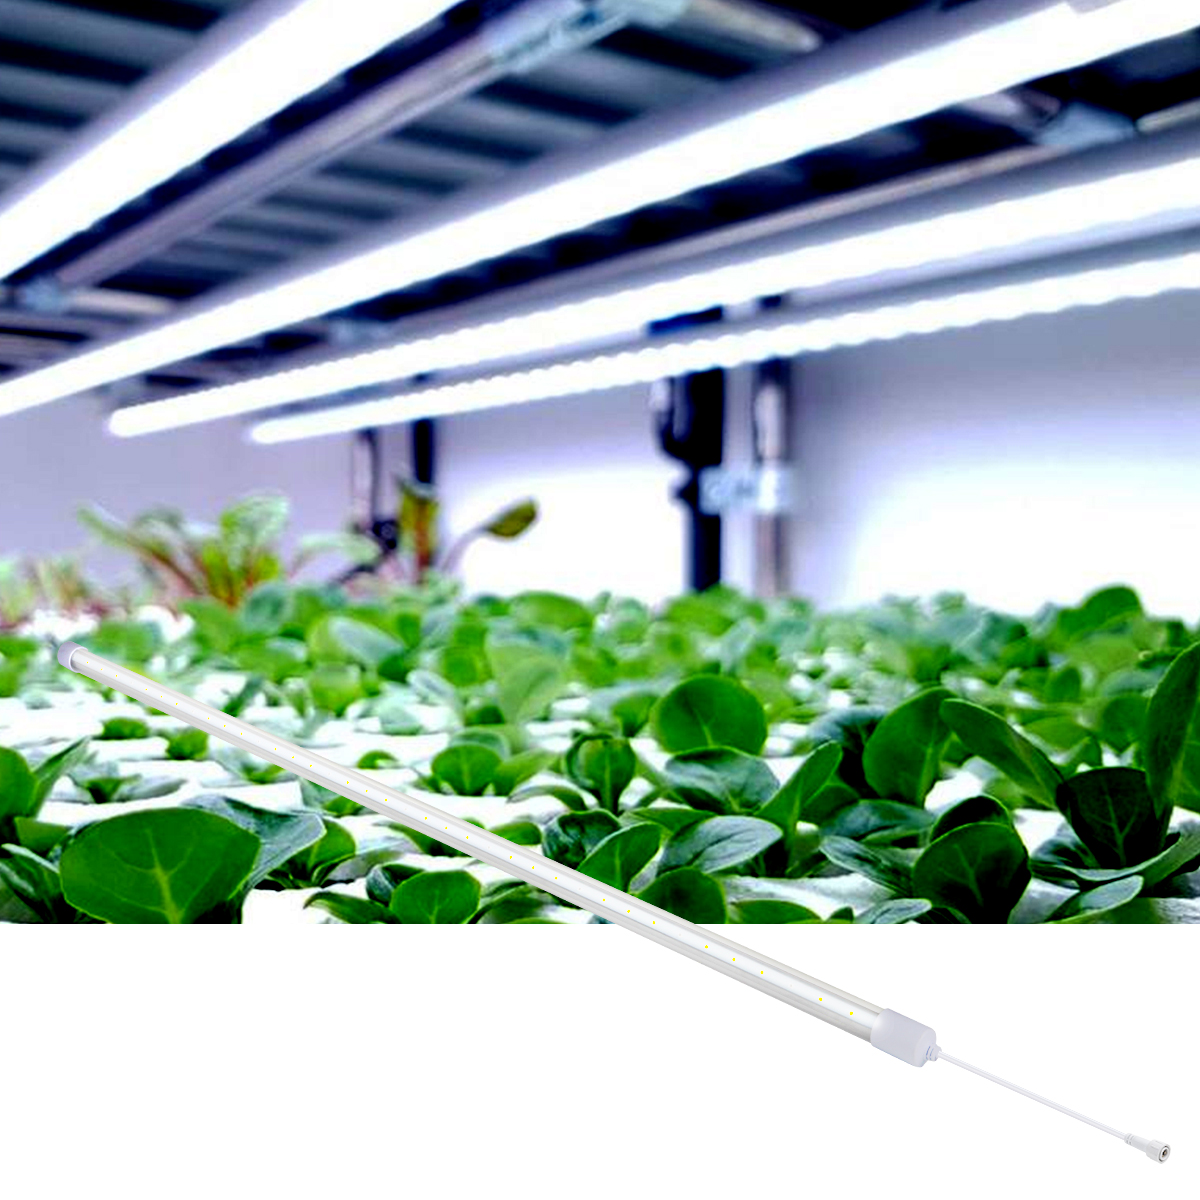 Reliable Shenzhen factory Hydroponics IP66 T8 grow light Full Spectrum Plant grow lamp 18W 24W 4ft Grow Lights Tube Fixture vertical farming Led Grow Light T8 Grow Lamp 
#ledgrowlight 
#verticalfarming 
#growlights